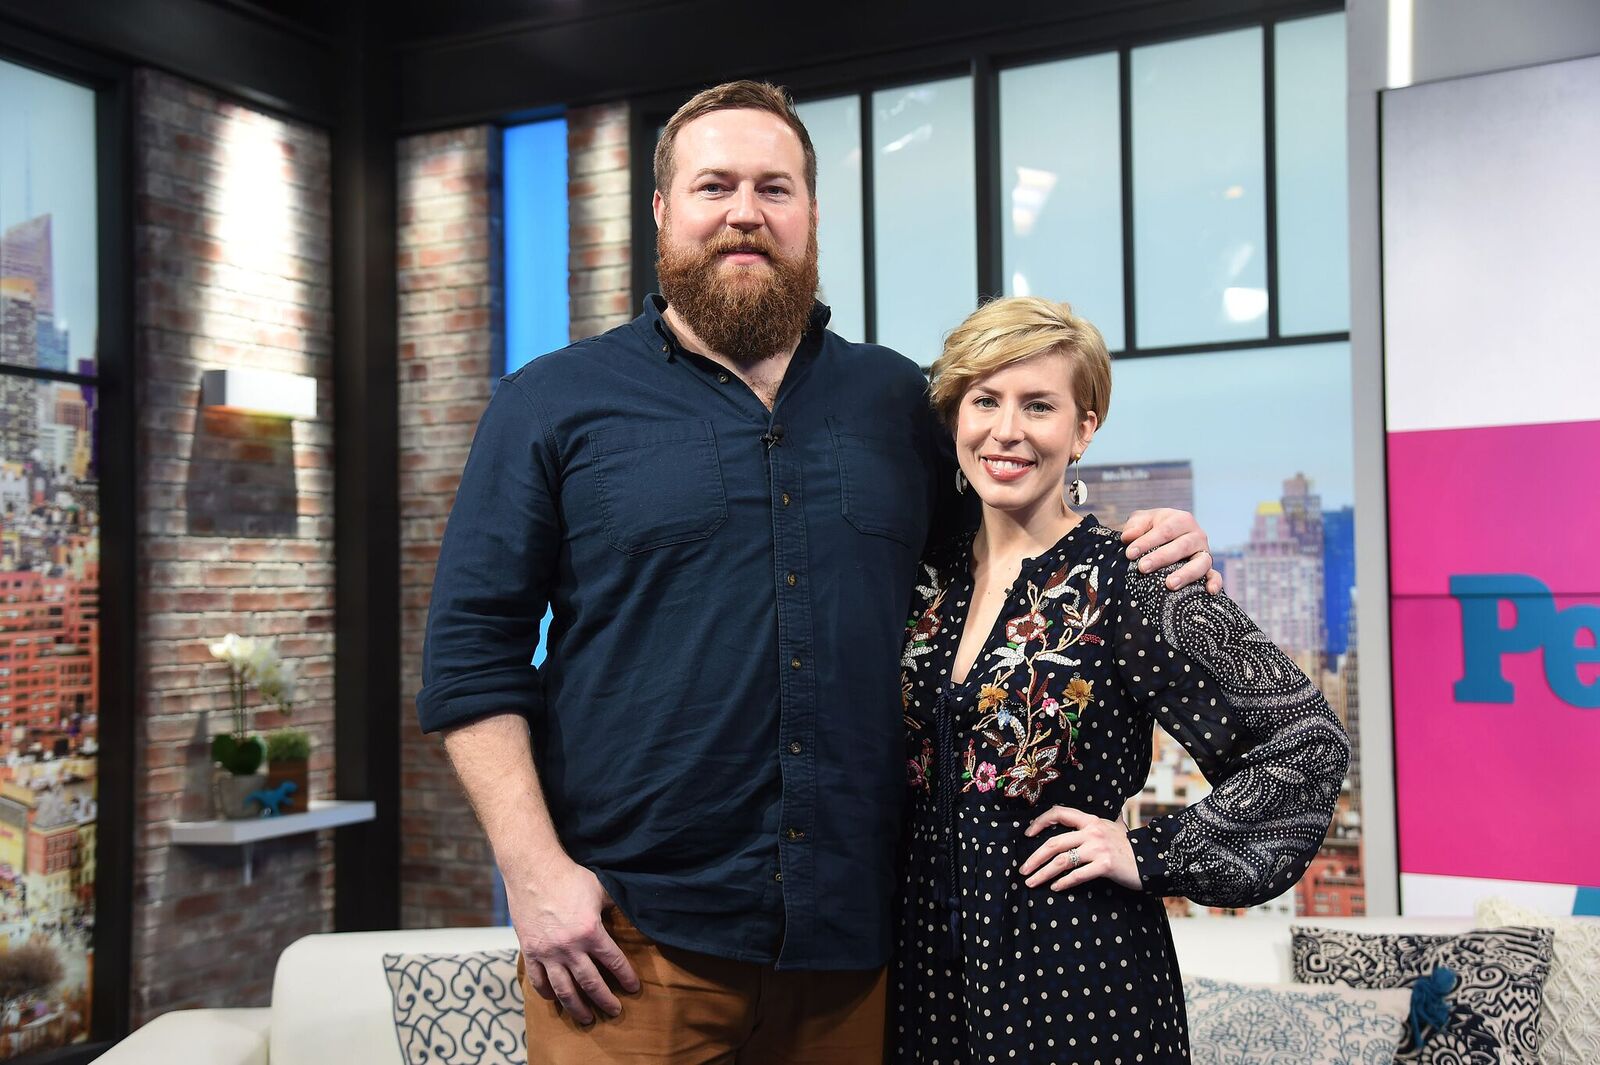 Ben Napier and Erin Napier of  "Home Town" visit People Now in New York for an interview in January 2020 | Source: Getty Images